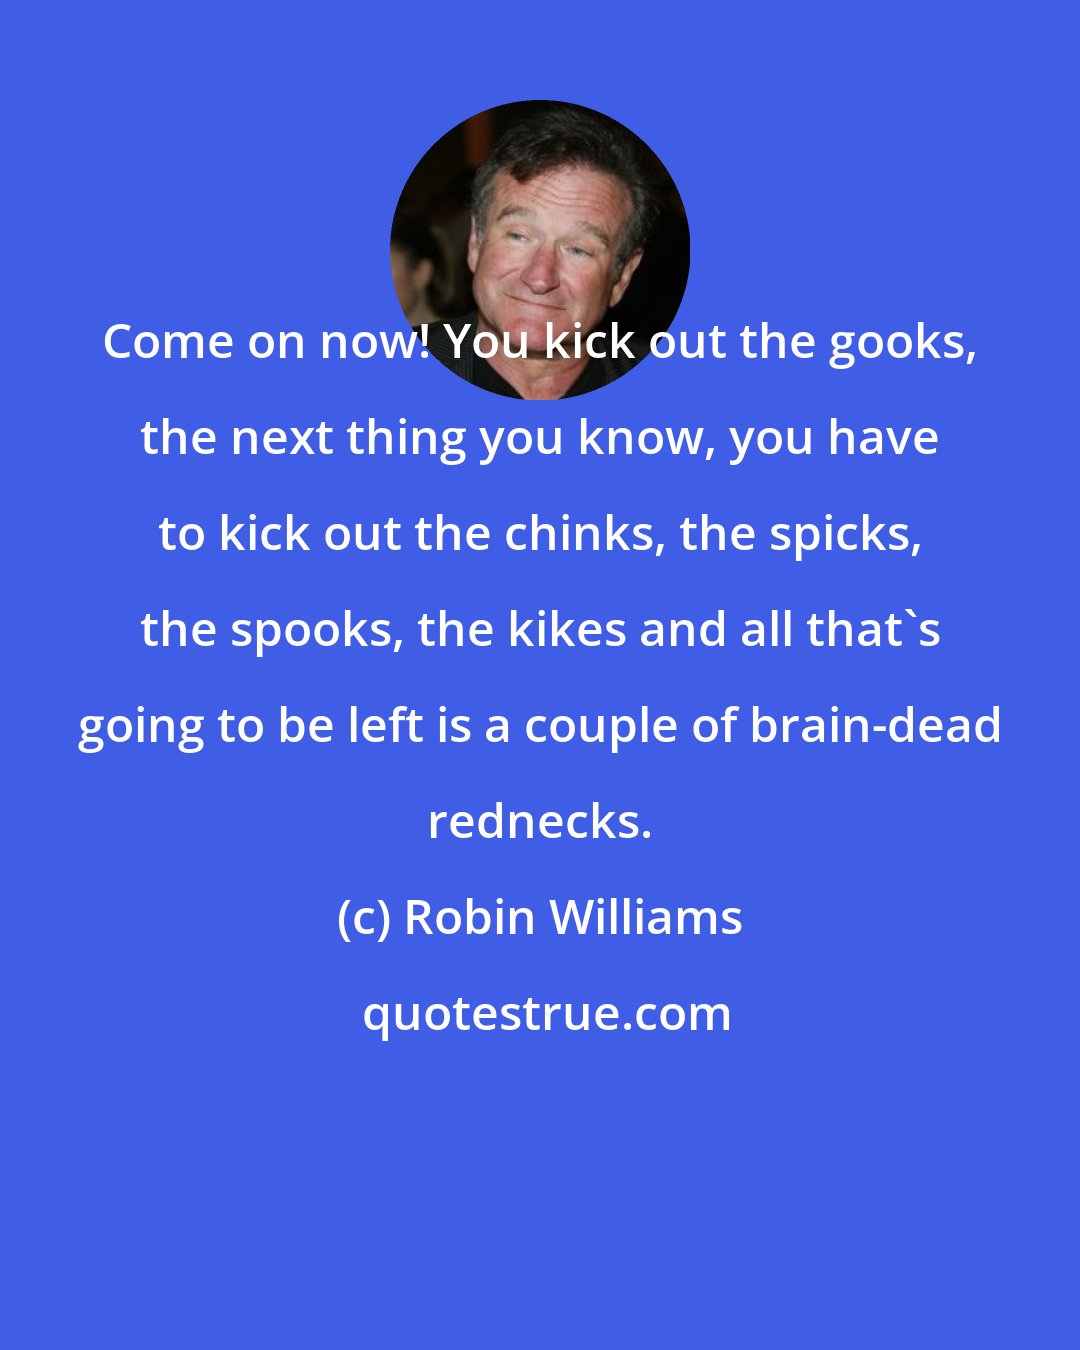 Robin Williams: Come on now! You kick out the gooks, the next thing you know, you have to kick out the chinks, the spicks, the spooks, the kikes and all that's going to be left is a couple of brain-dead rednecks.